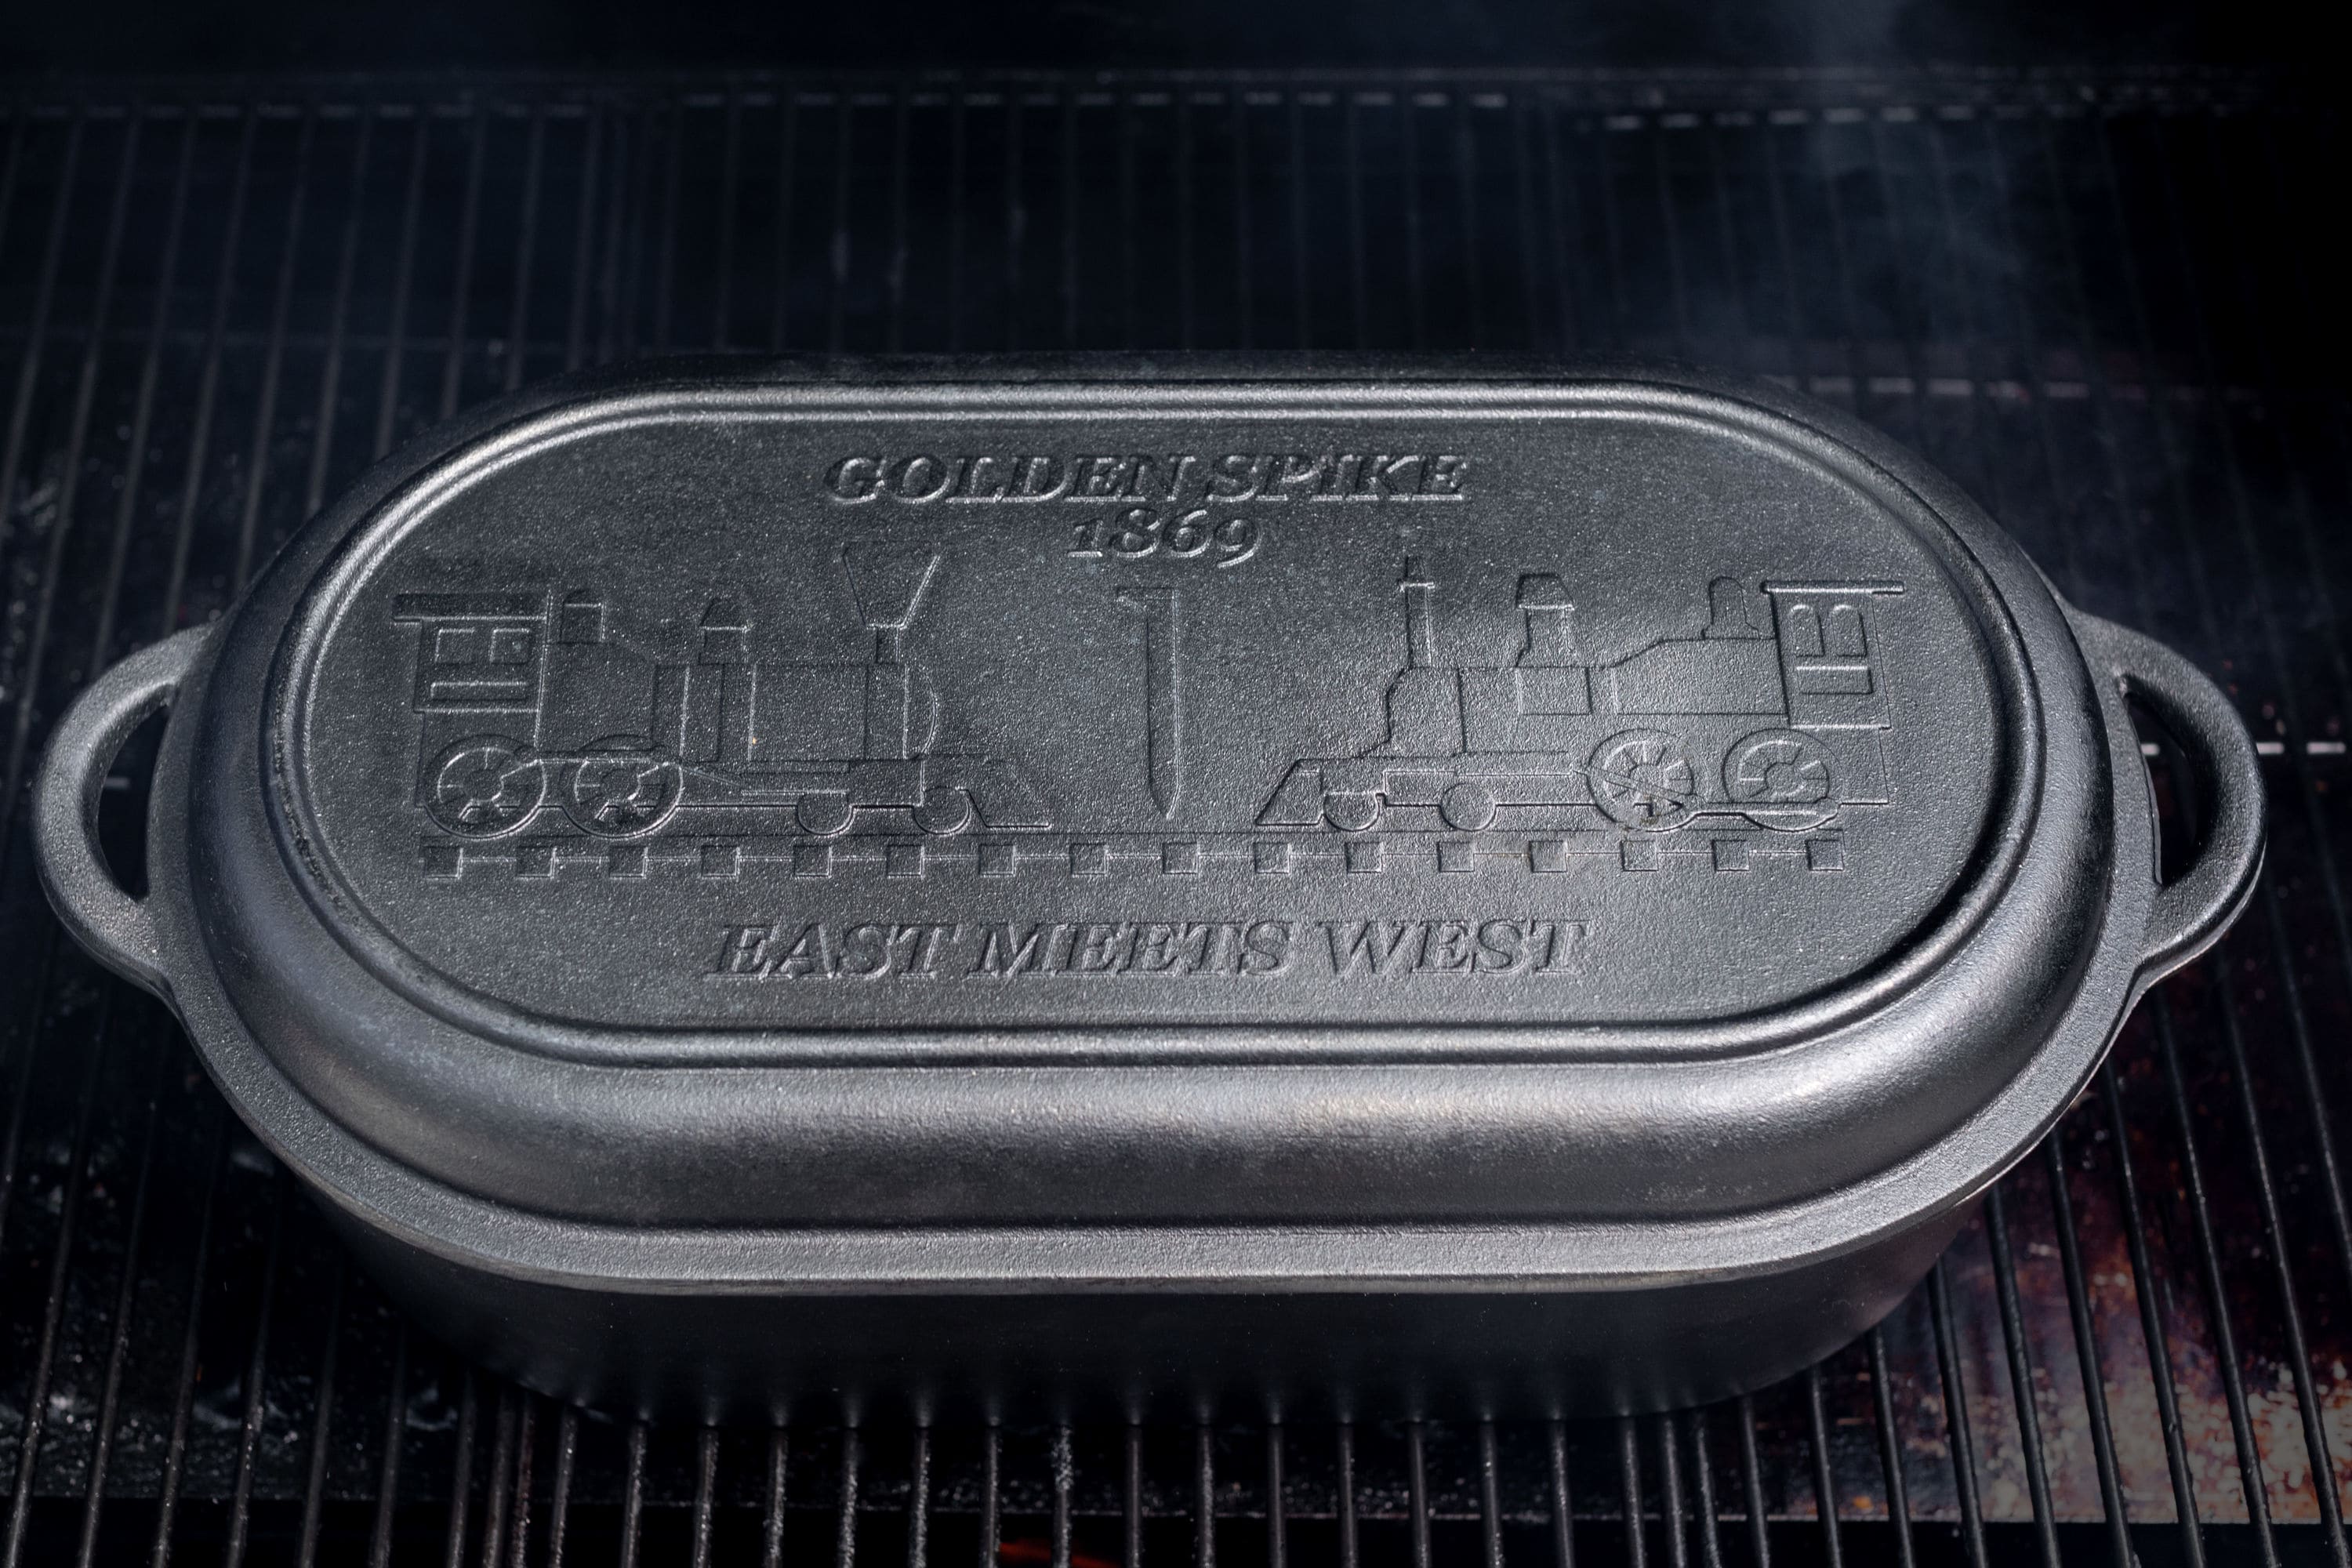 Pit Boss Cast Iron Roaster Review